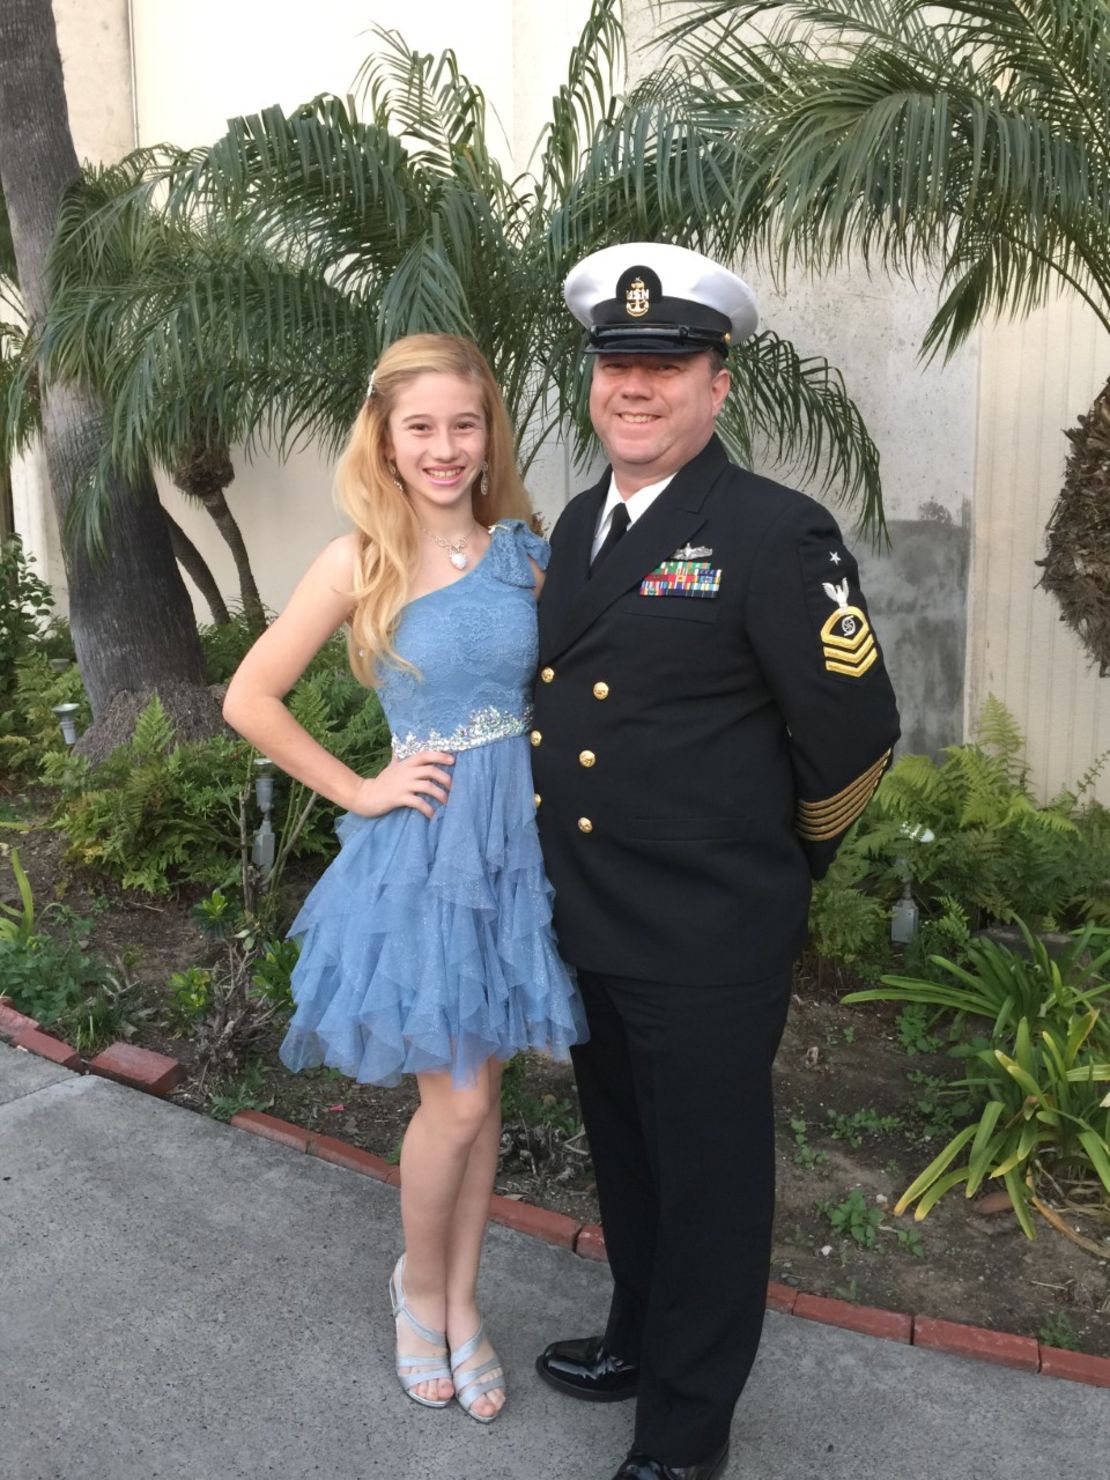 Isabelle poses with her sailor father